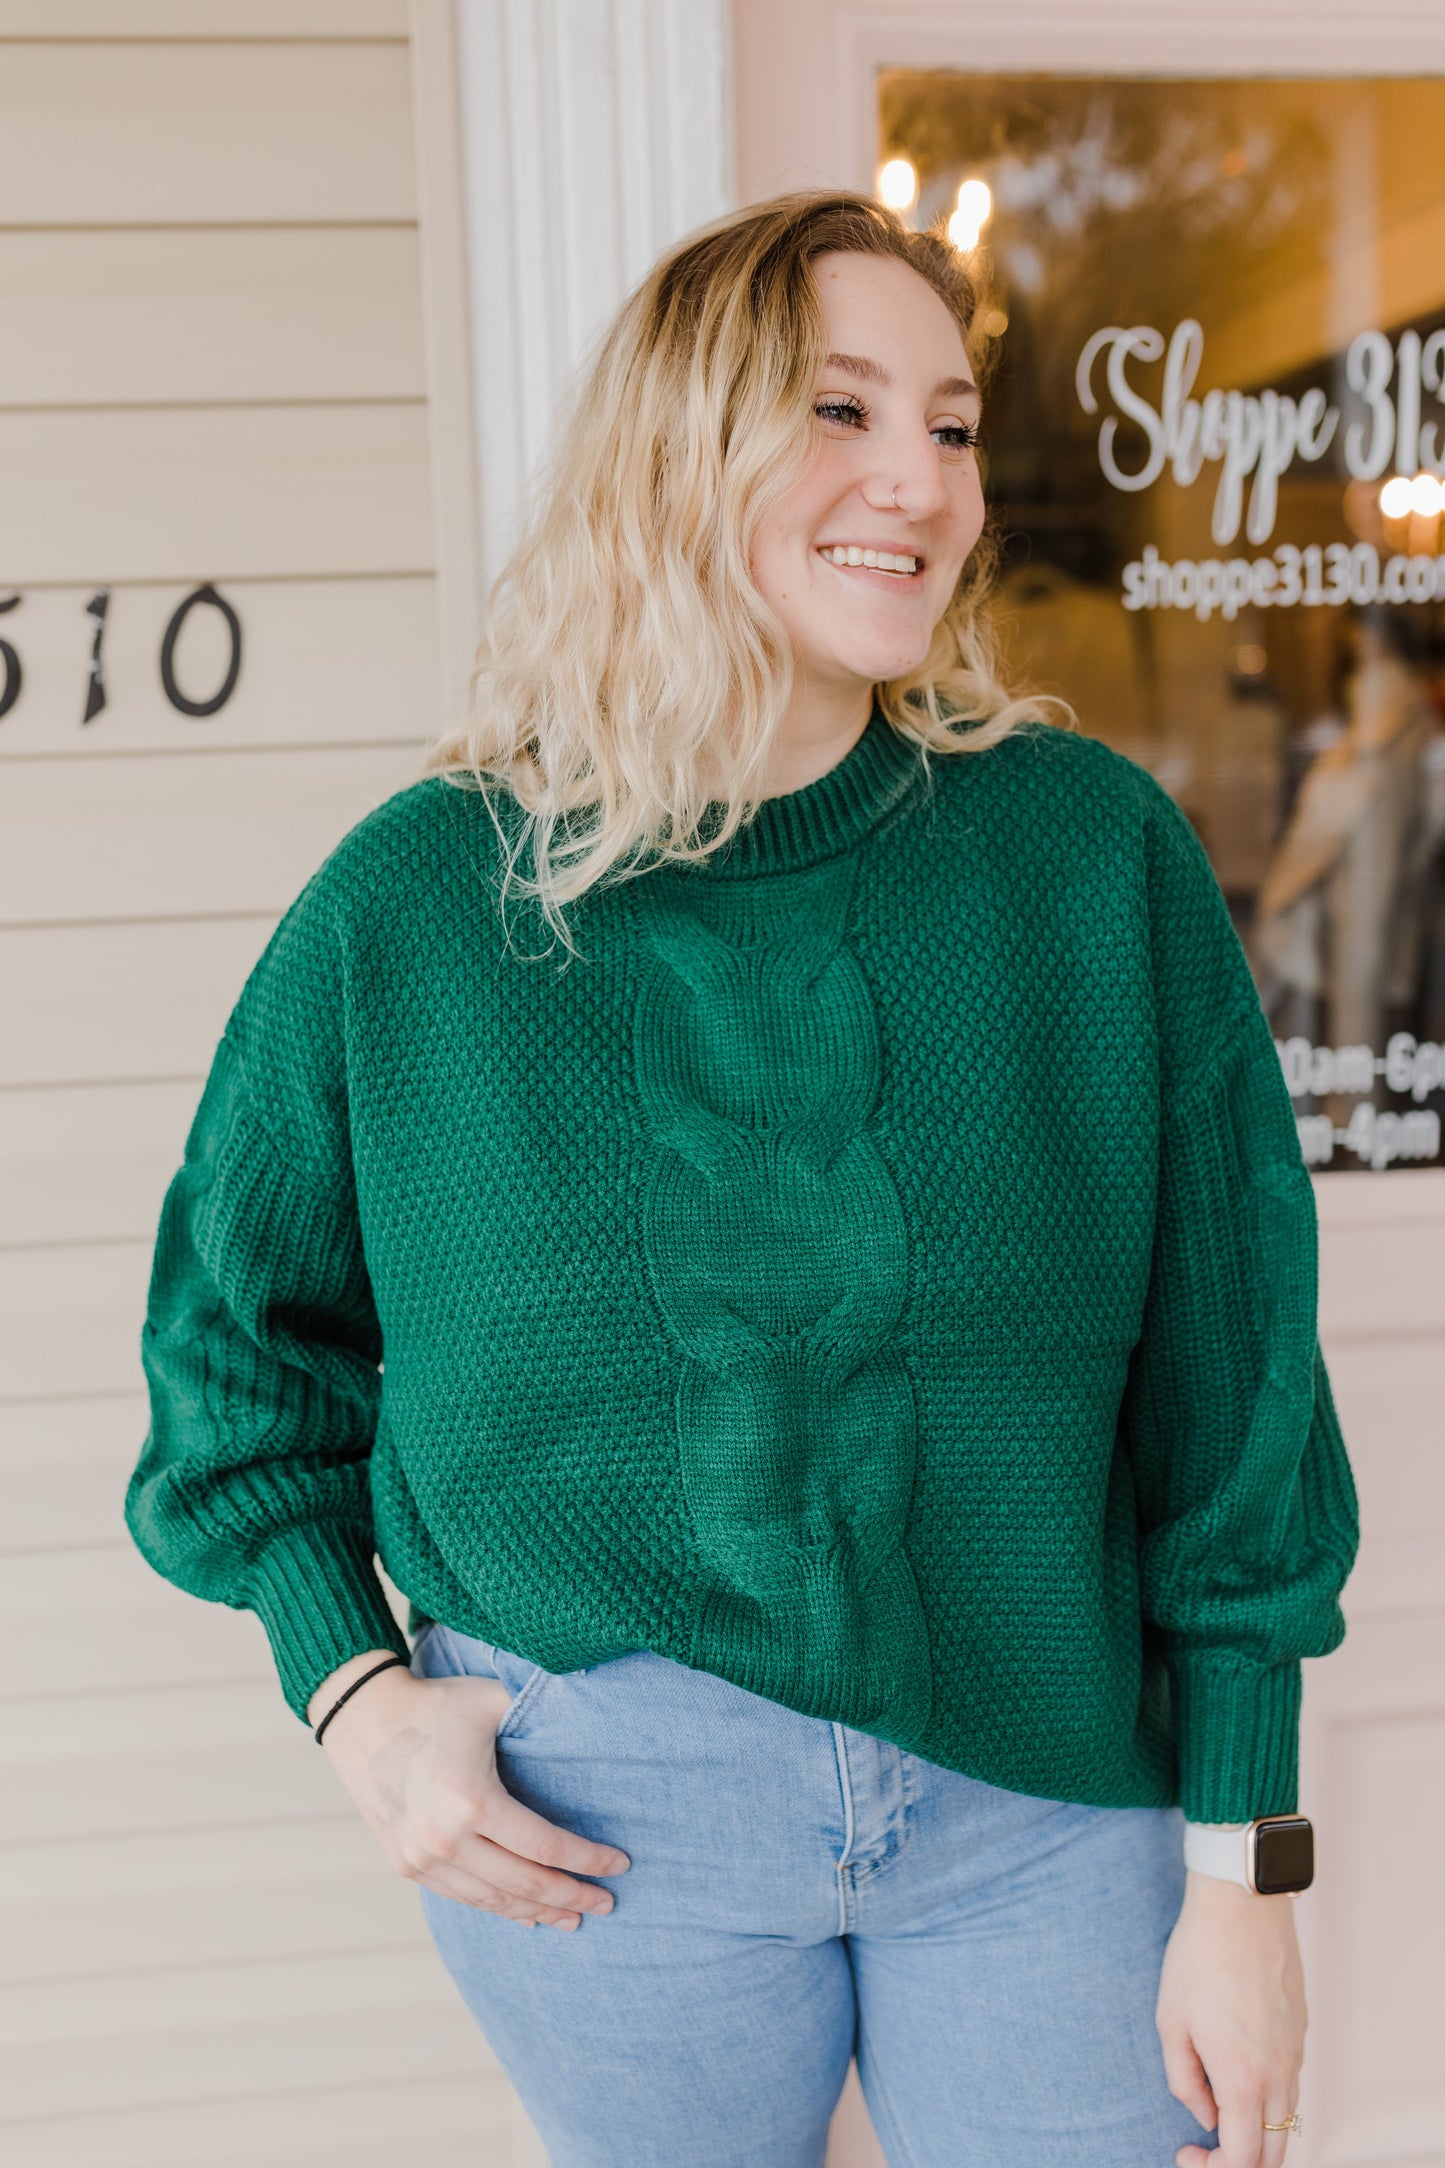 FINAL SALE DOORBUSTER Cable Knit Sweater